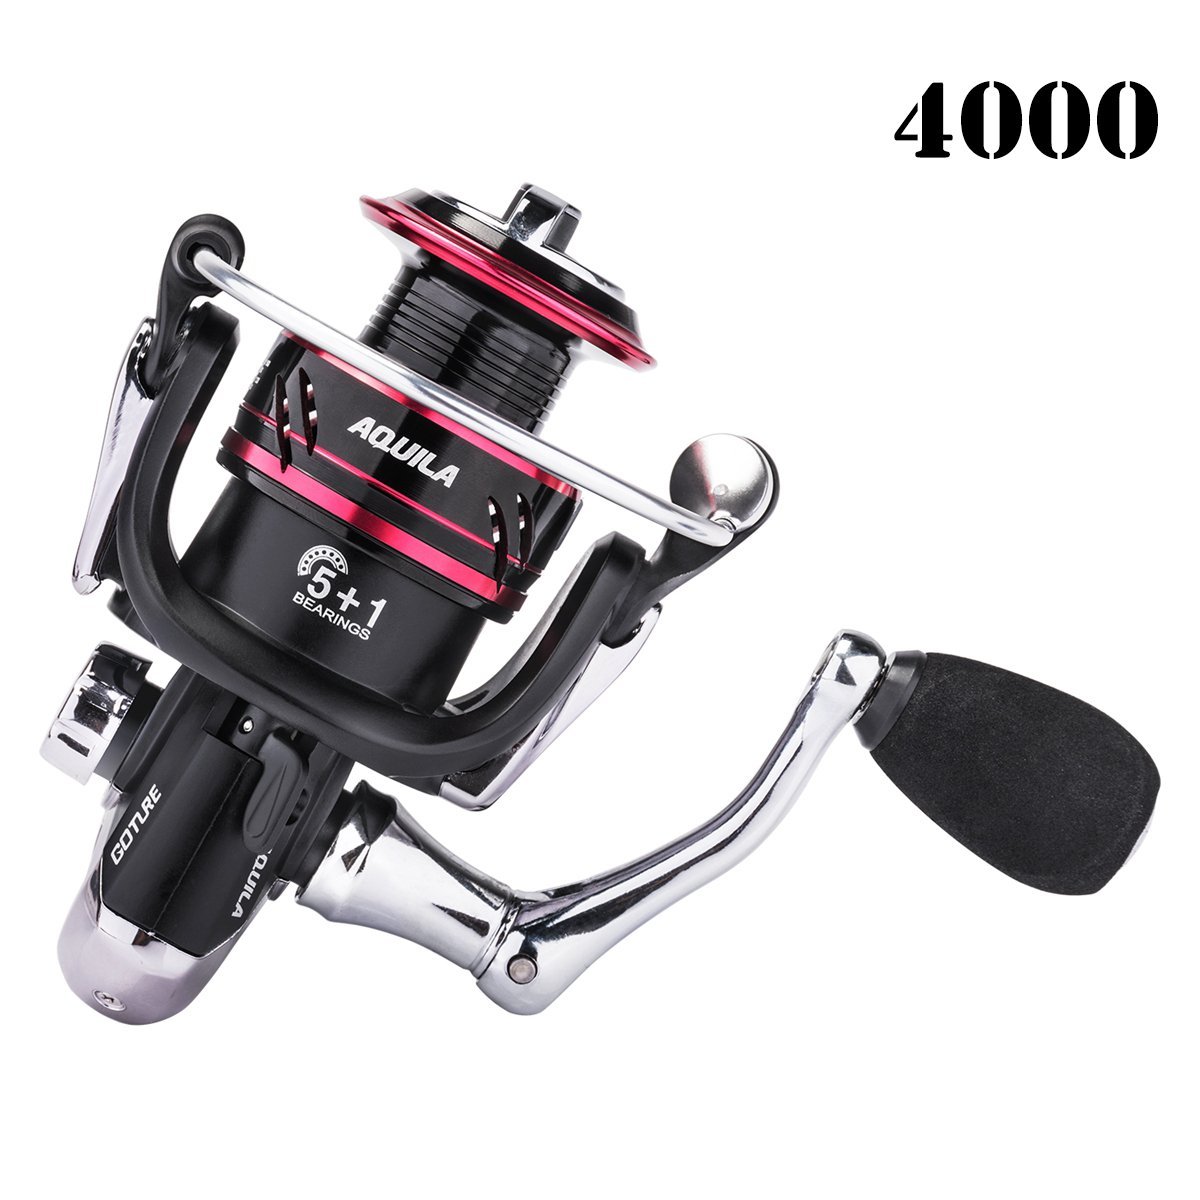 Goture Long Casting Fishing Reel 12000 Series Spinning Reel 14+1BB High  Capacity Big Game Boat Freshwater Saltwater Surf Fishing Reel, Spinning  Reels -  Canada